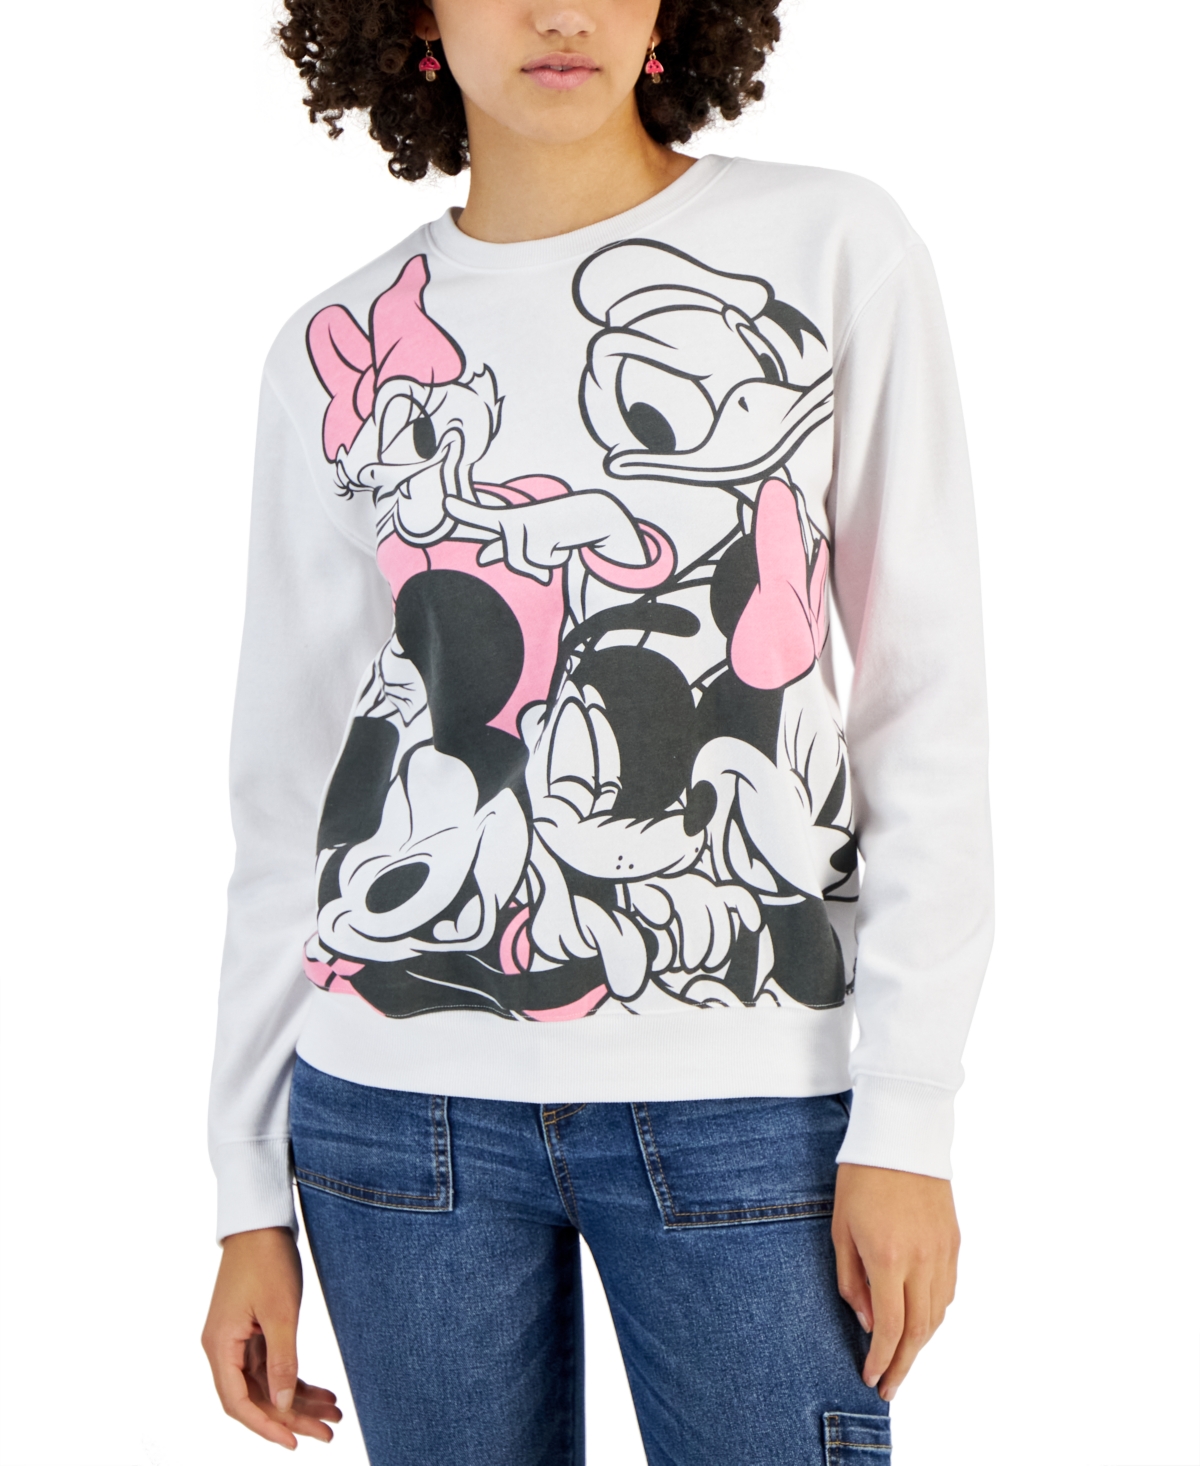 Disney Juniors' Mickey Mouse & Friends Graphic Sweatshirt In White